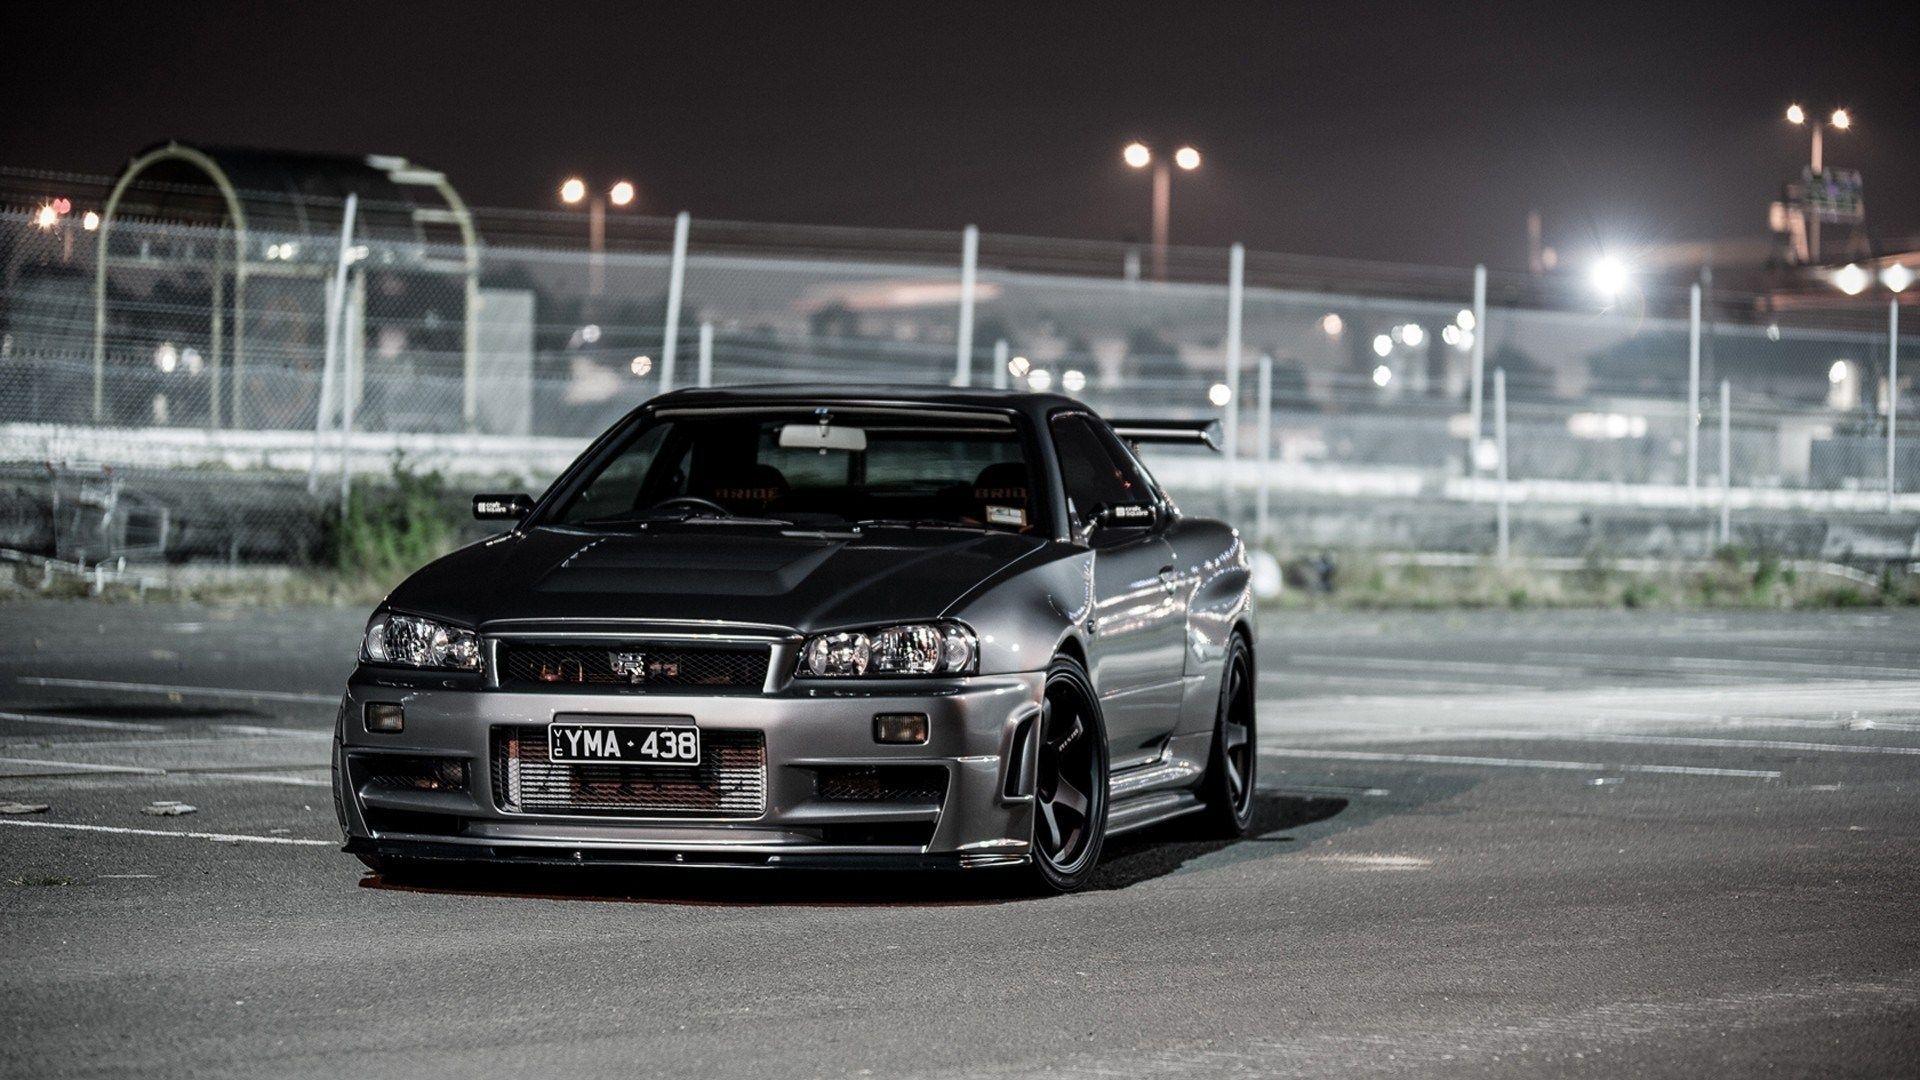 Skyline R34 Wallpapers Wallpaper Cave